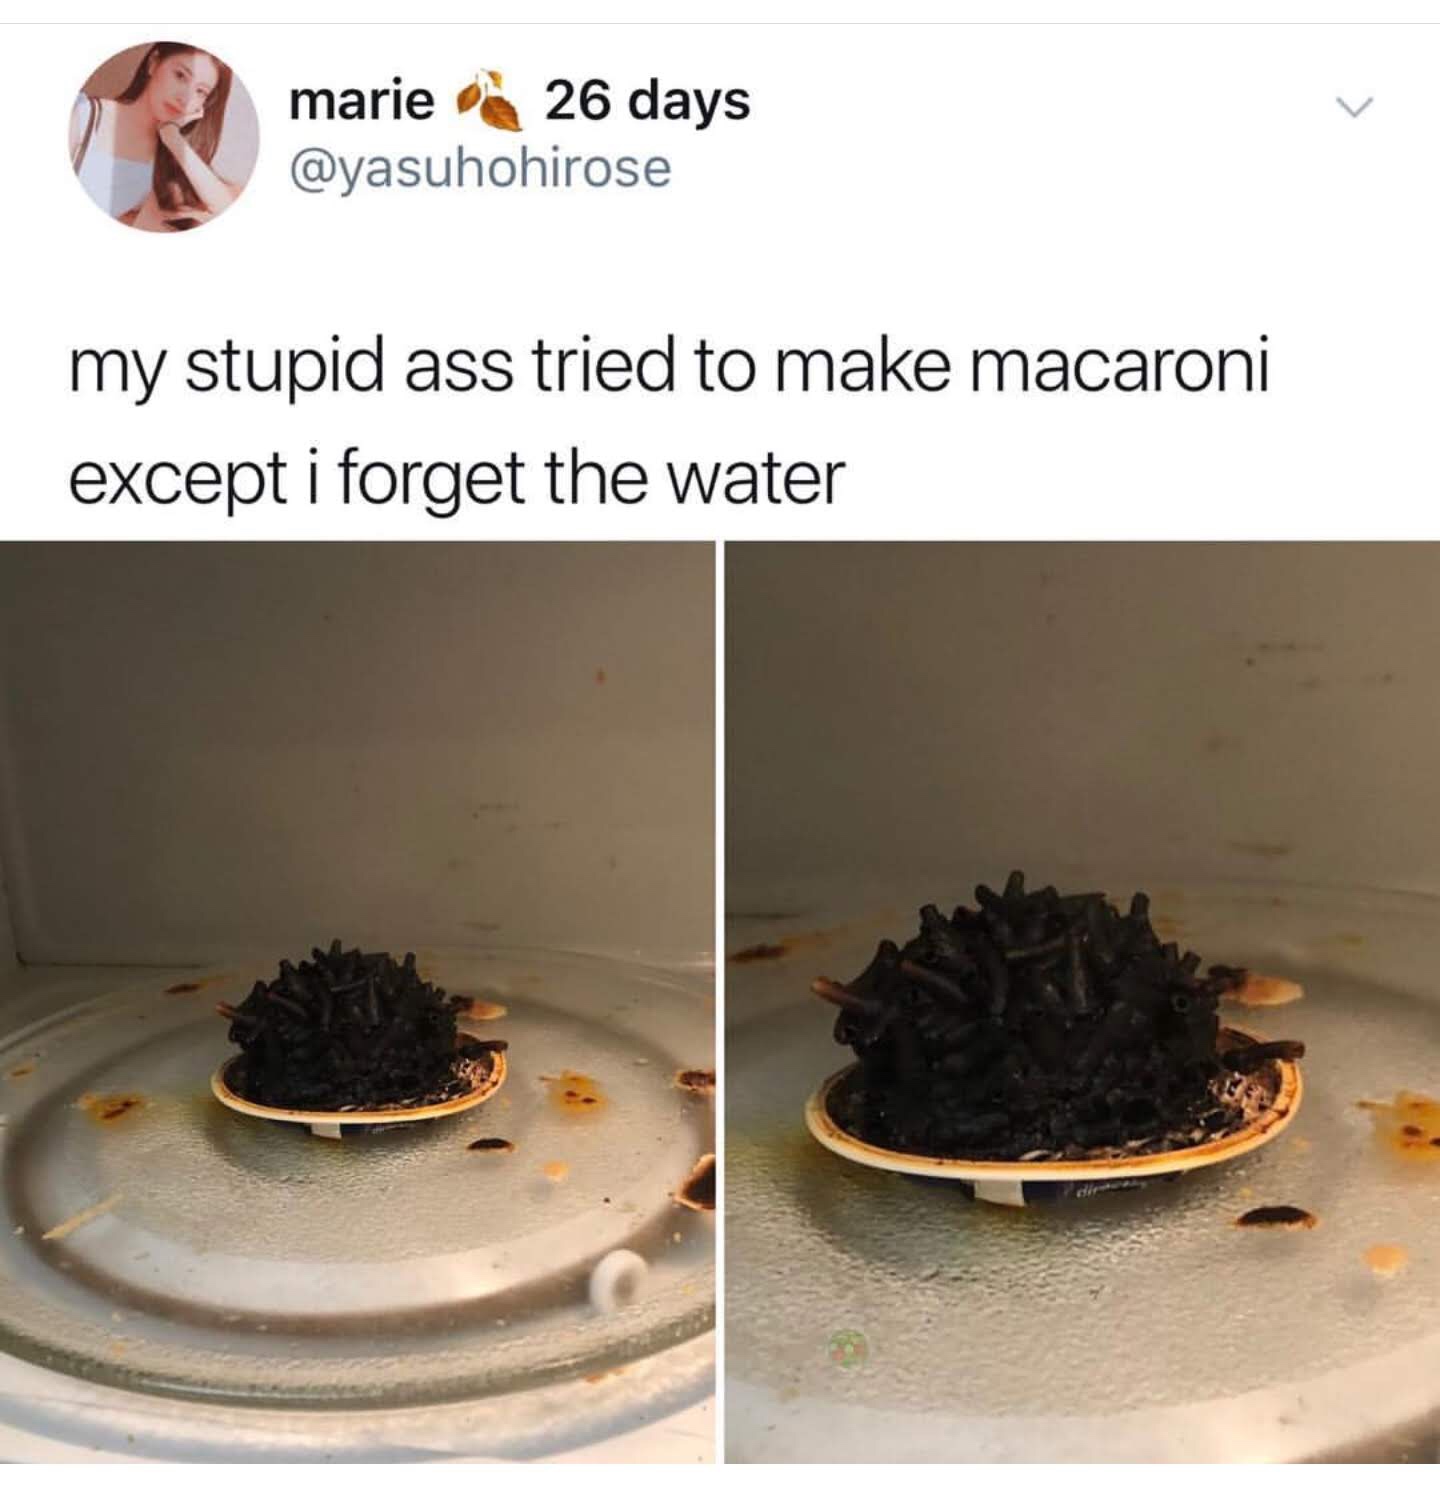 memes - Humour - marie26 days my stupid ass tried to make macaroni except i forget the water